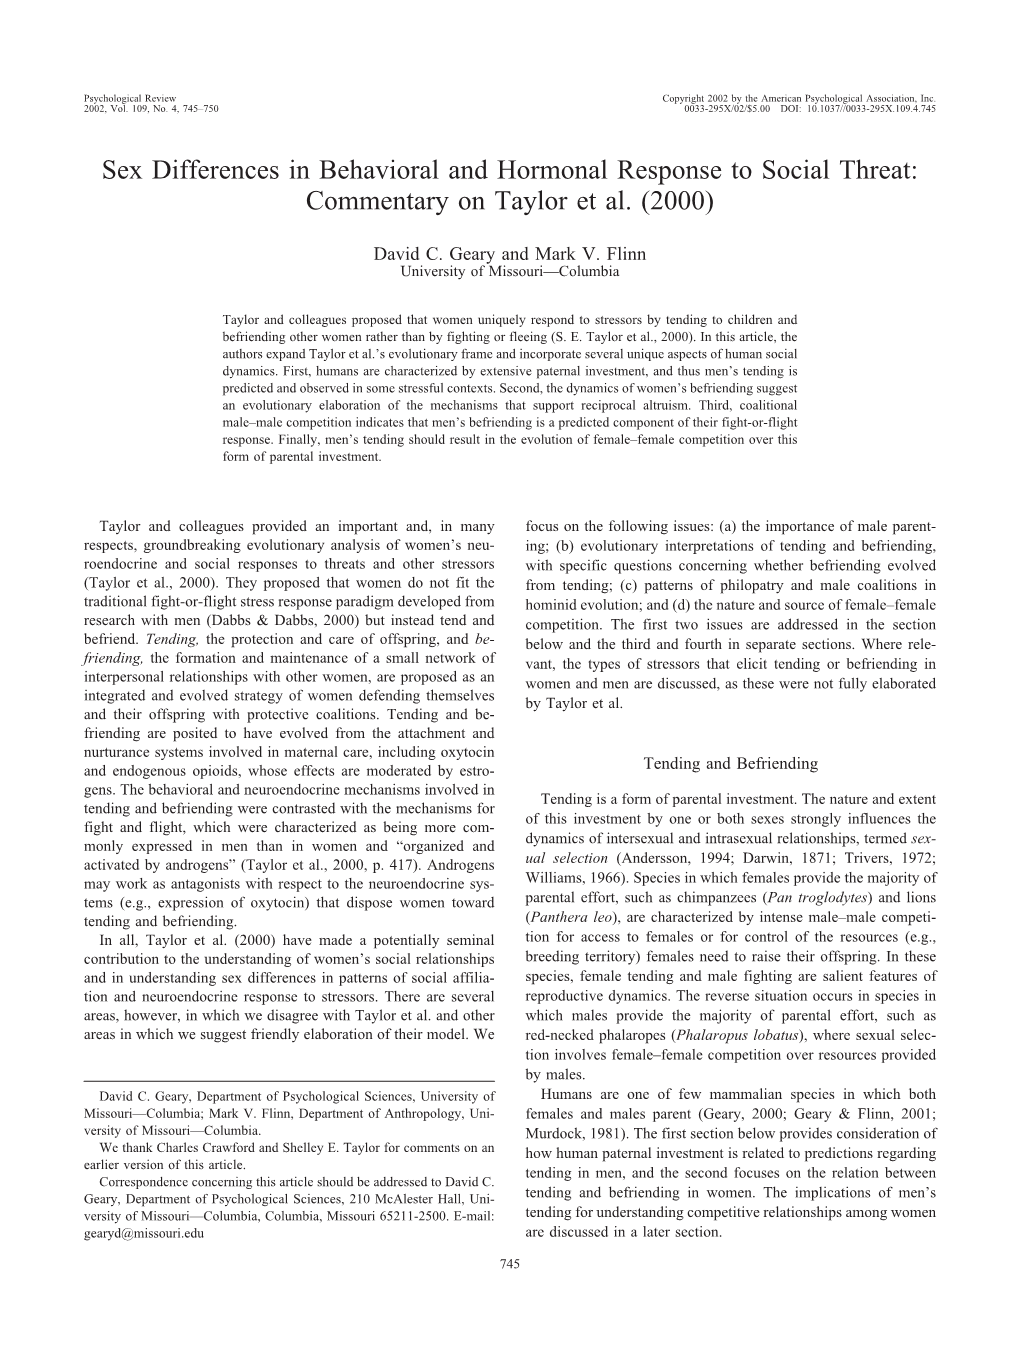 Commentary on Taylor Et Al